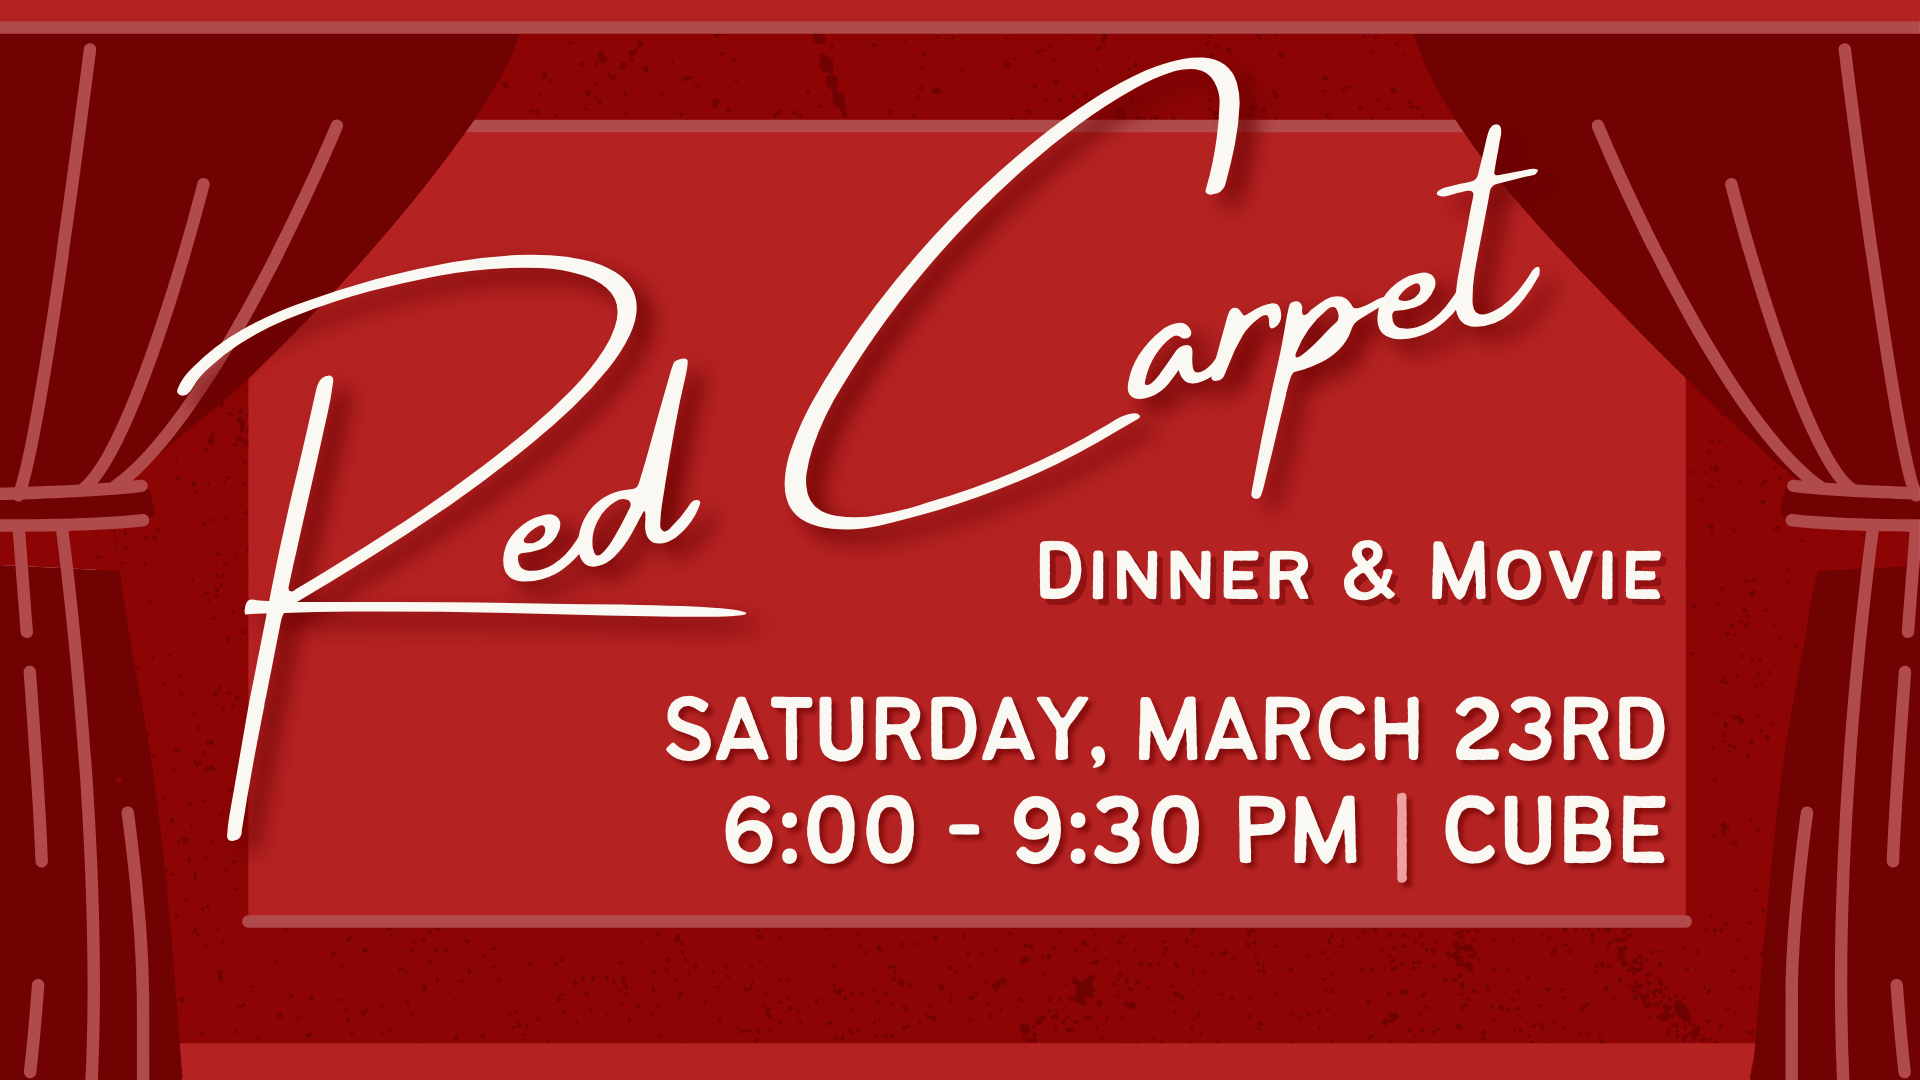 Red carpet dinner and movie